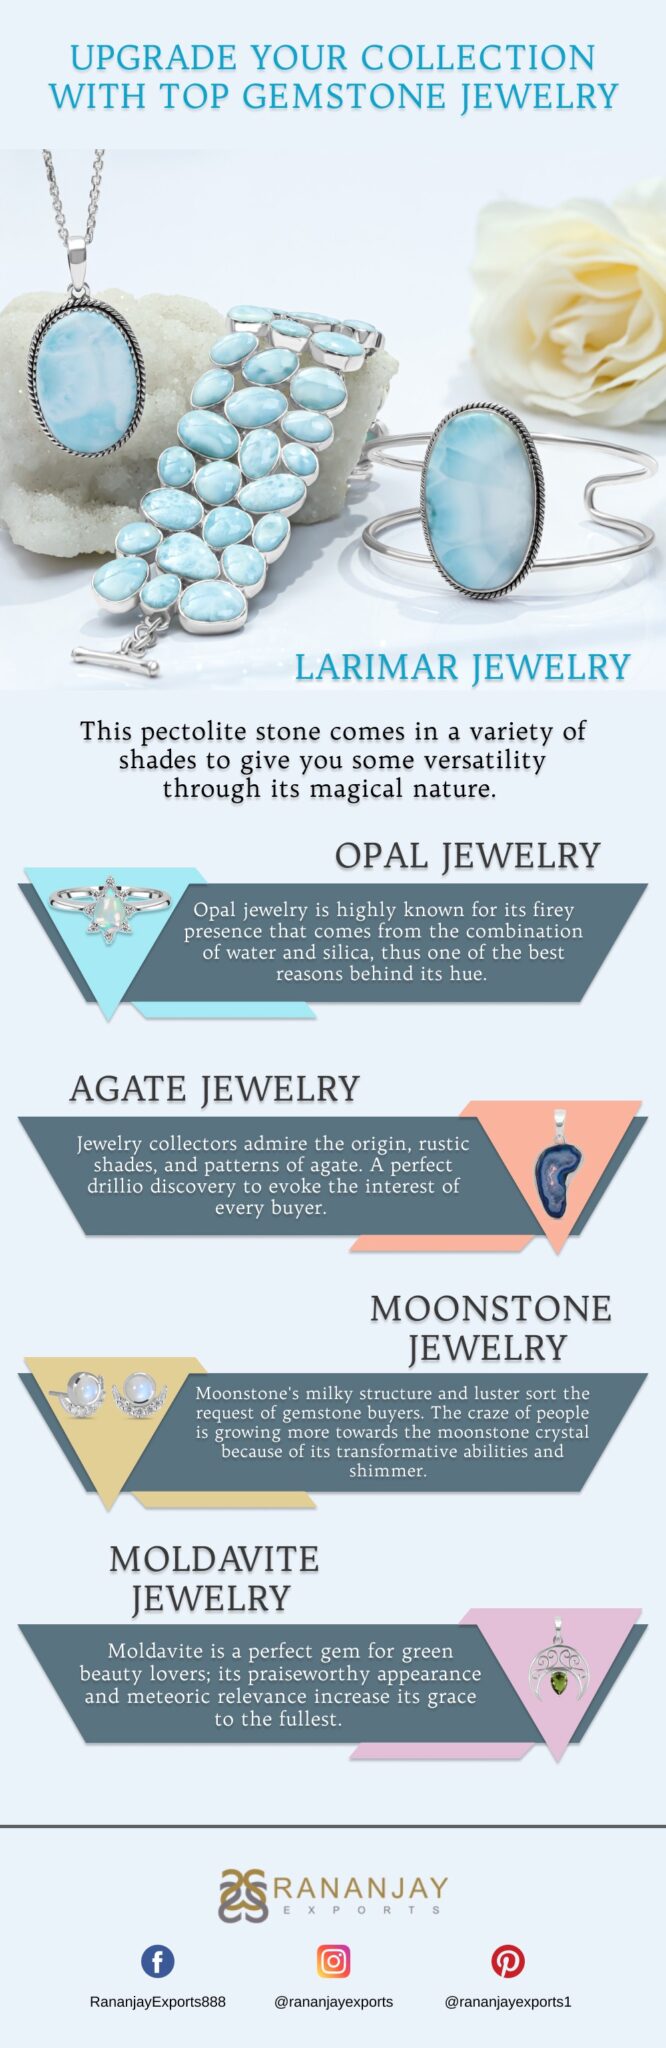 Upgrade your collection with top gemstone jewelry-7dacf5ad